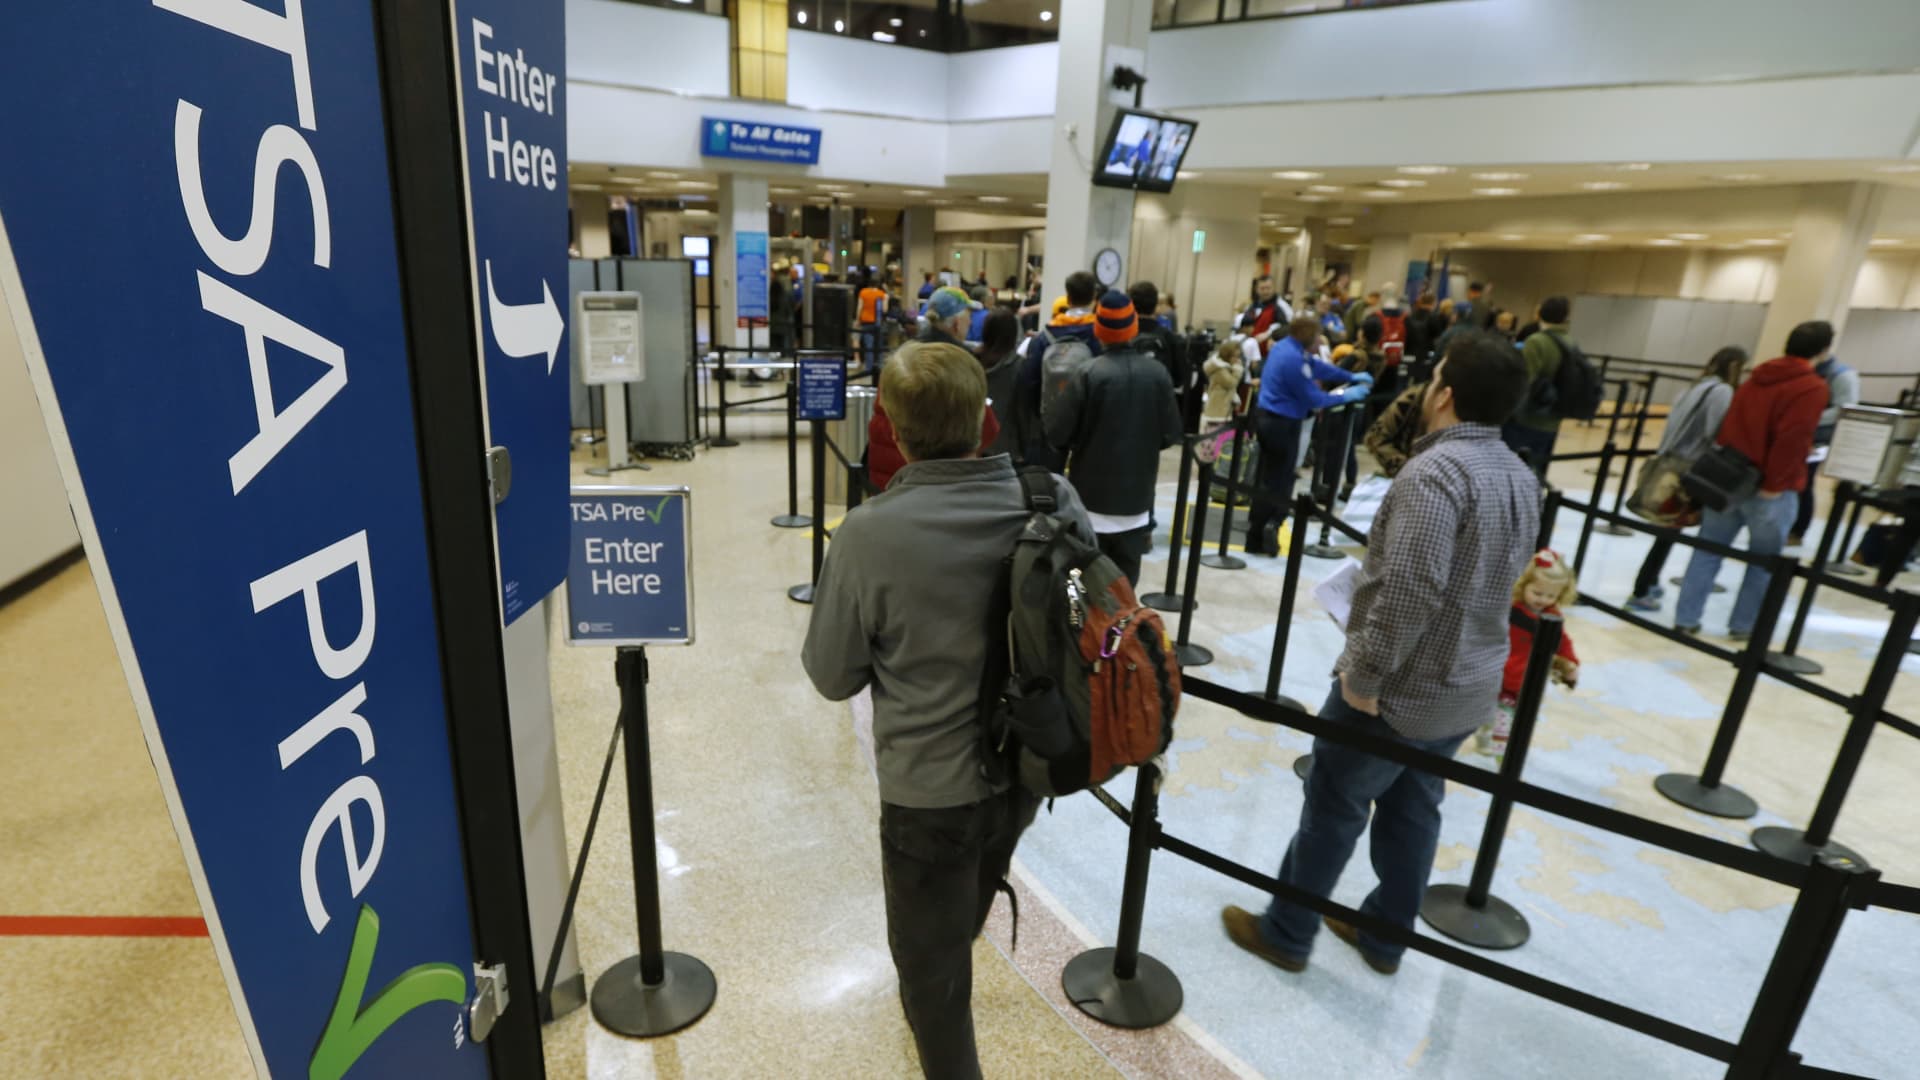 A passenger enters the Transportation Security Administration (TSA) pre-check line towards a security check point at Salt Lake City International Airport in Salt Lake City, Utah, U.S., on Tuesday, Dec. 23, 2014.